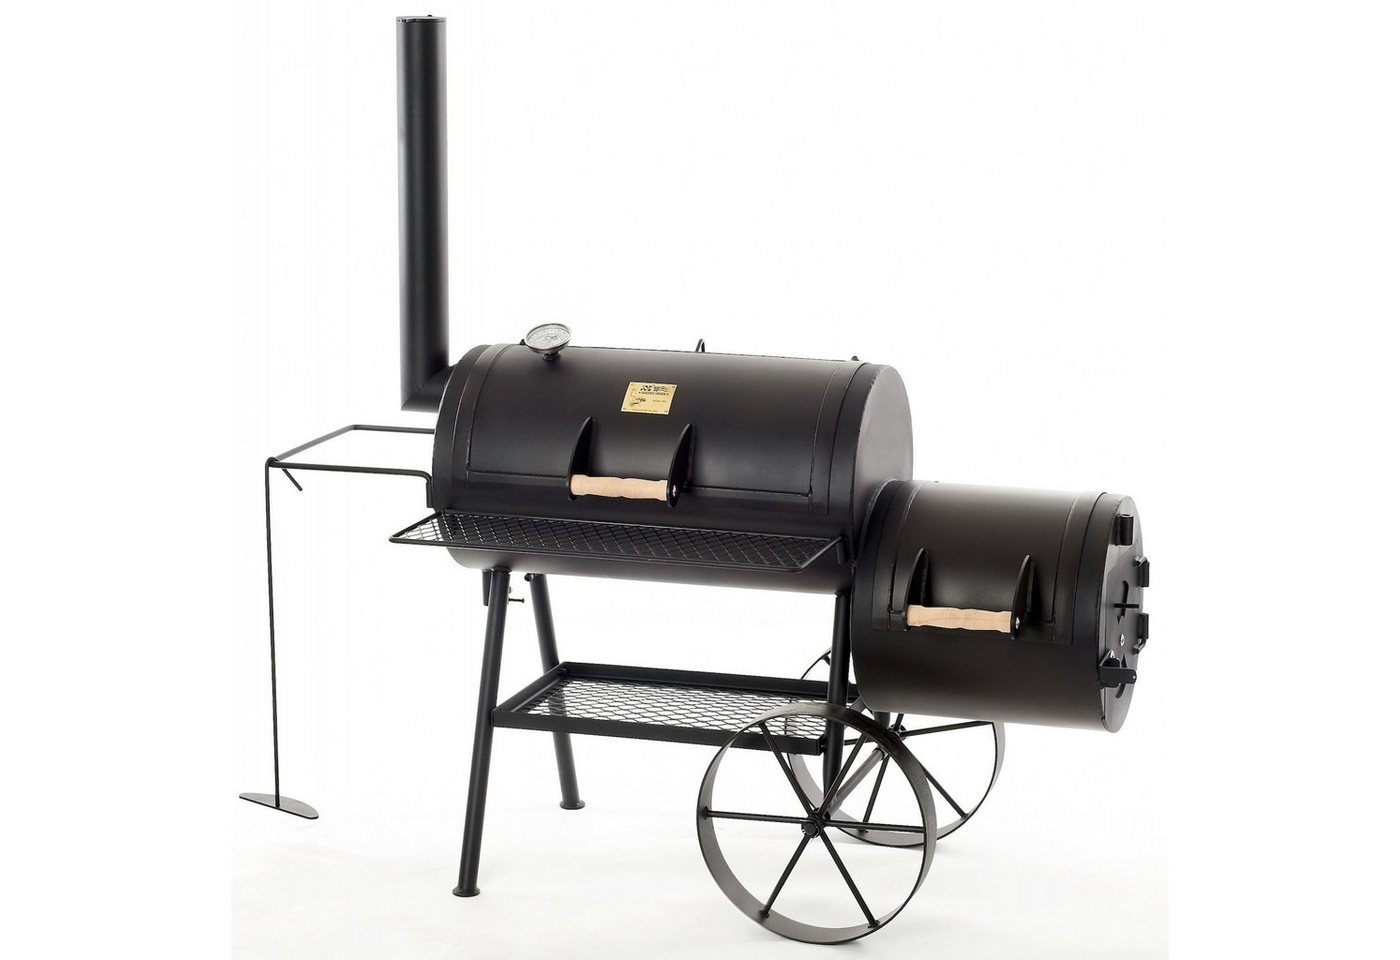 Rumo Barbeque Smoker Rumo Barbeque JOEs Barbecue Smoker Tradition 16 Zoll JS-33750 von Rumo Barbeque